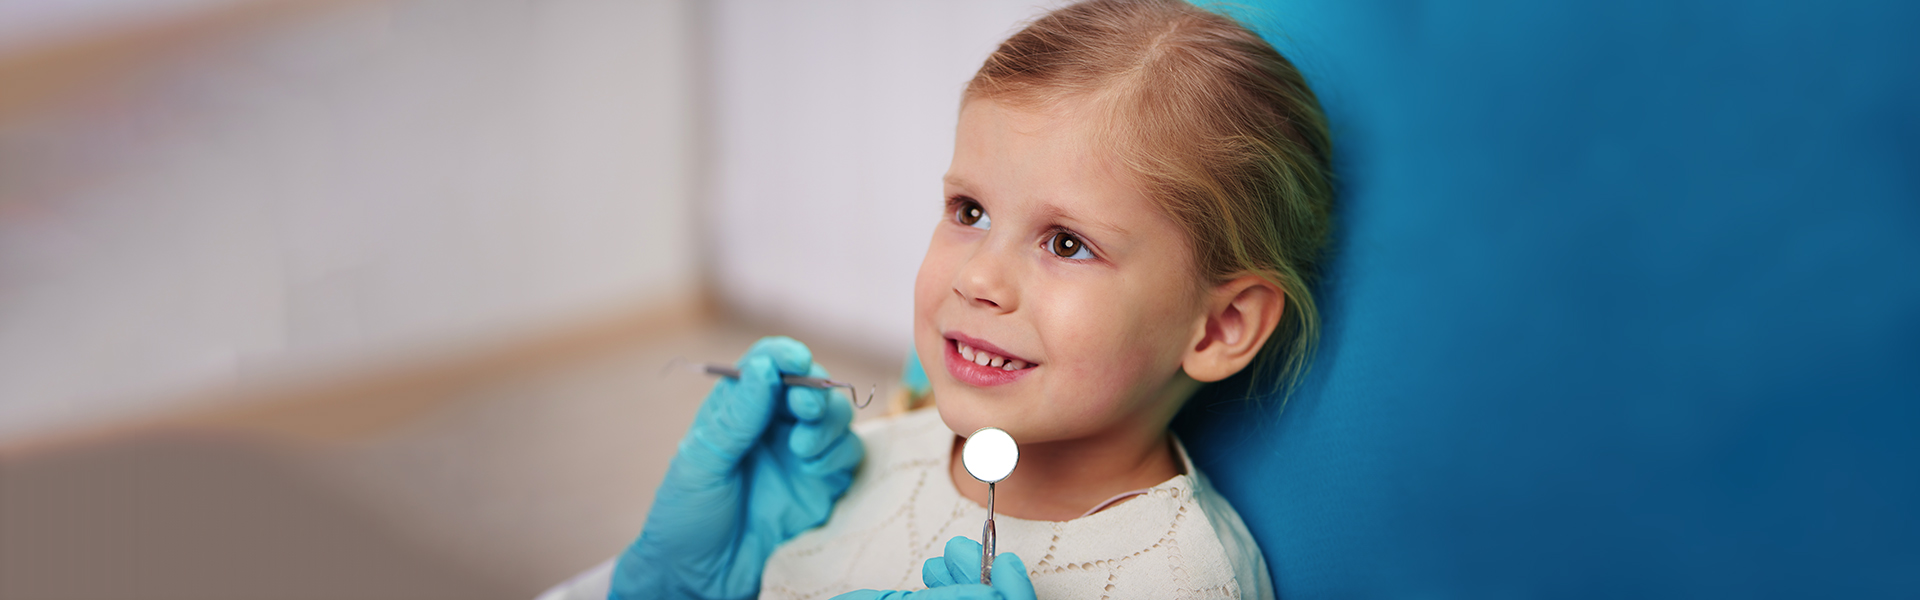 The 3 Most Important Ages for Kids to Visit the Dentist